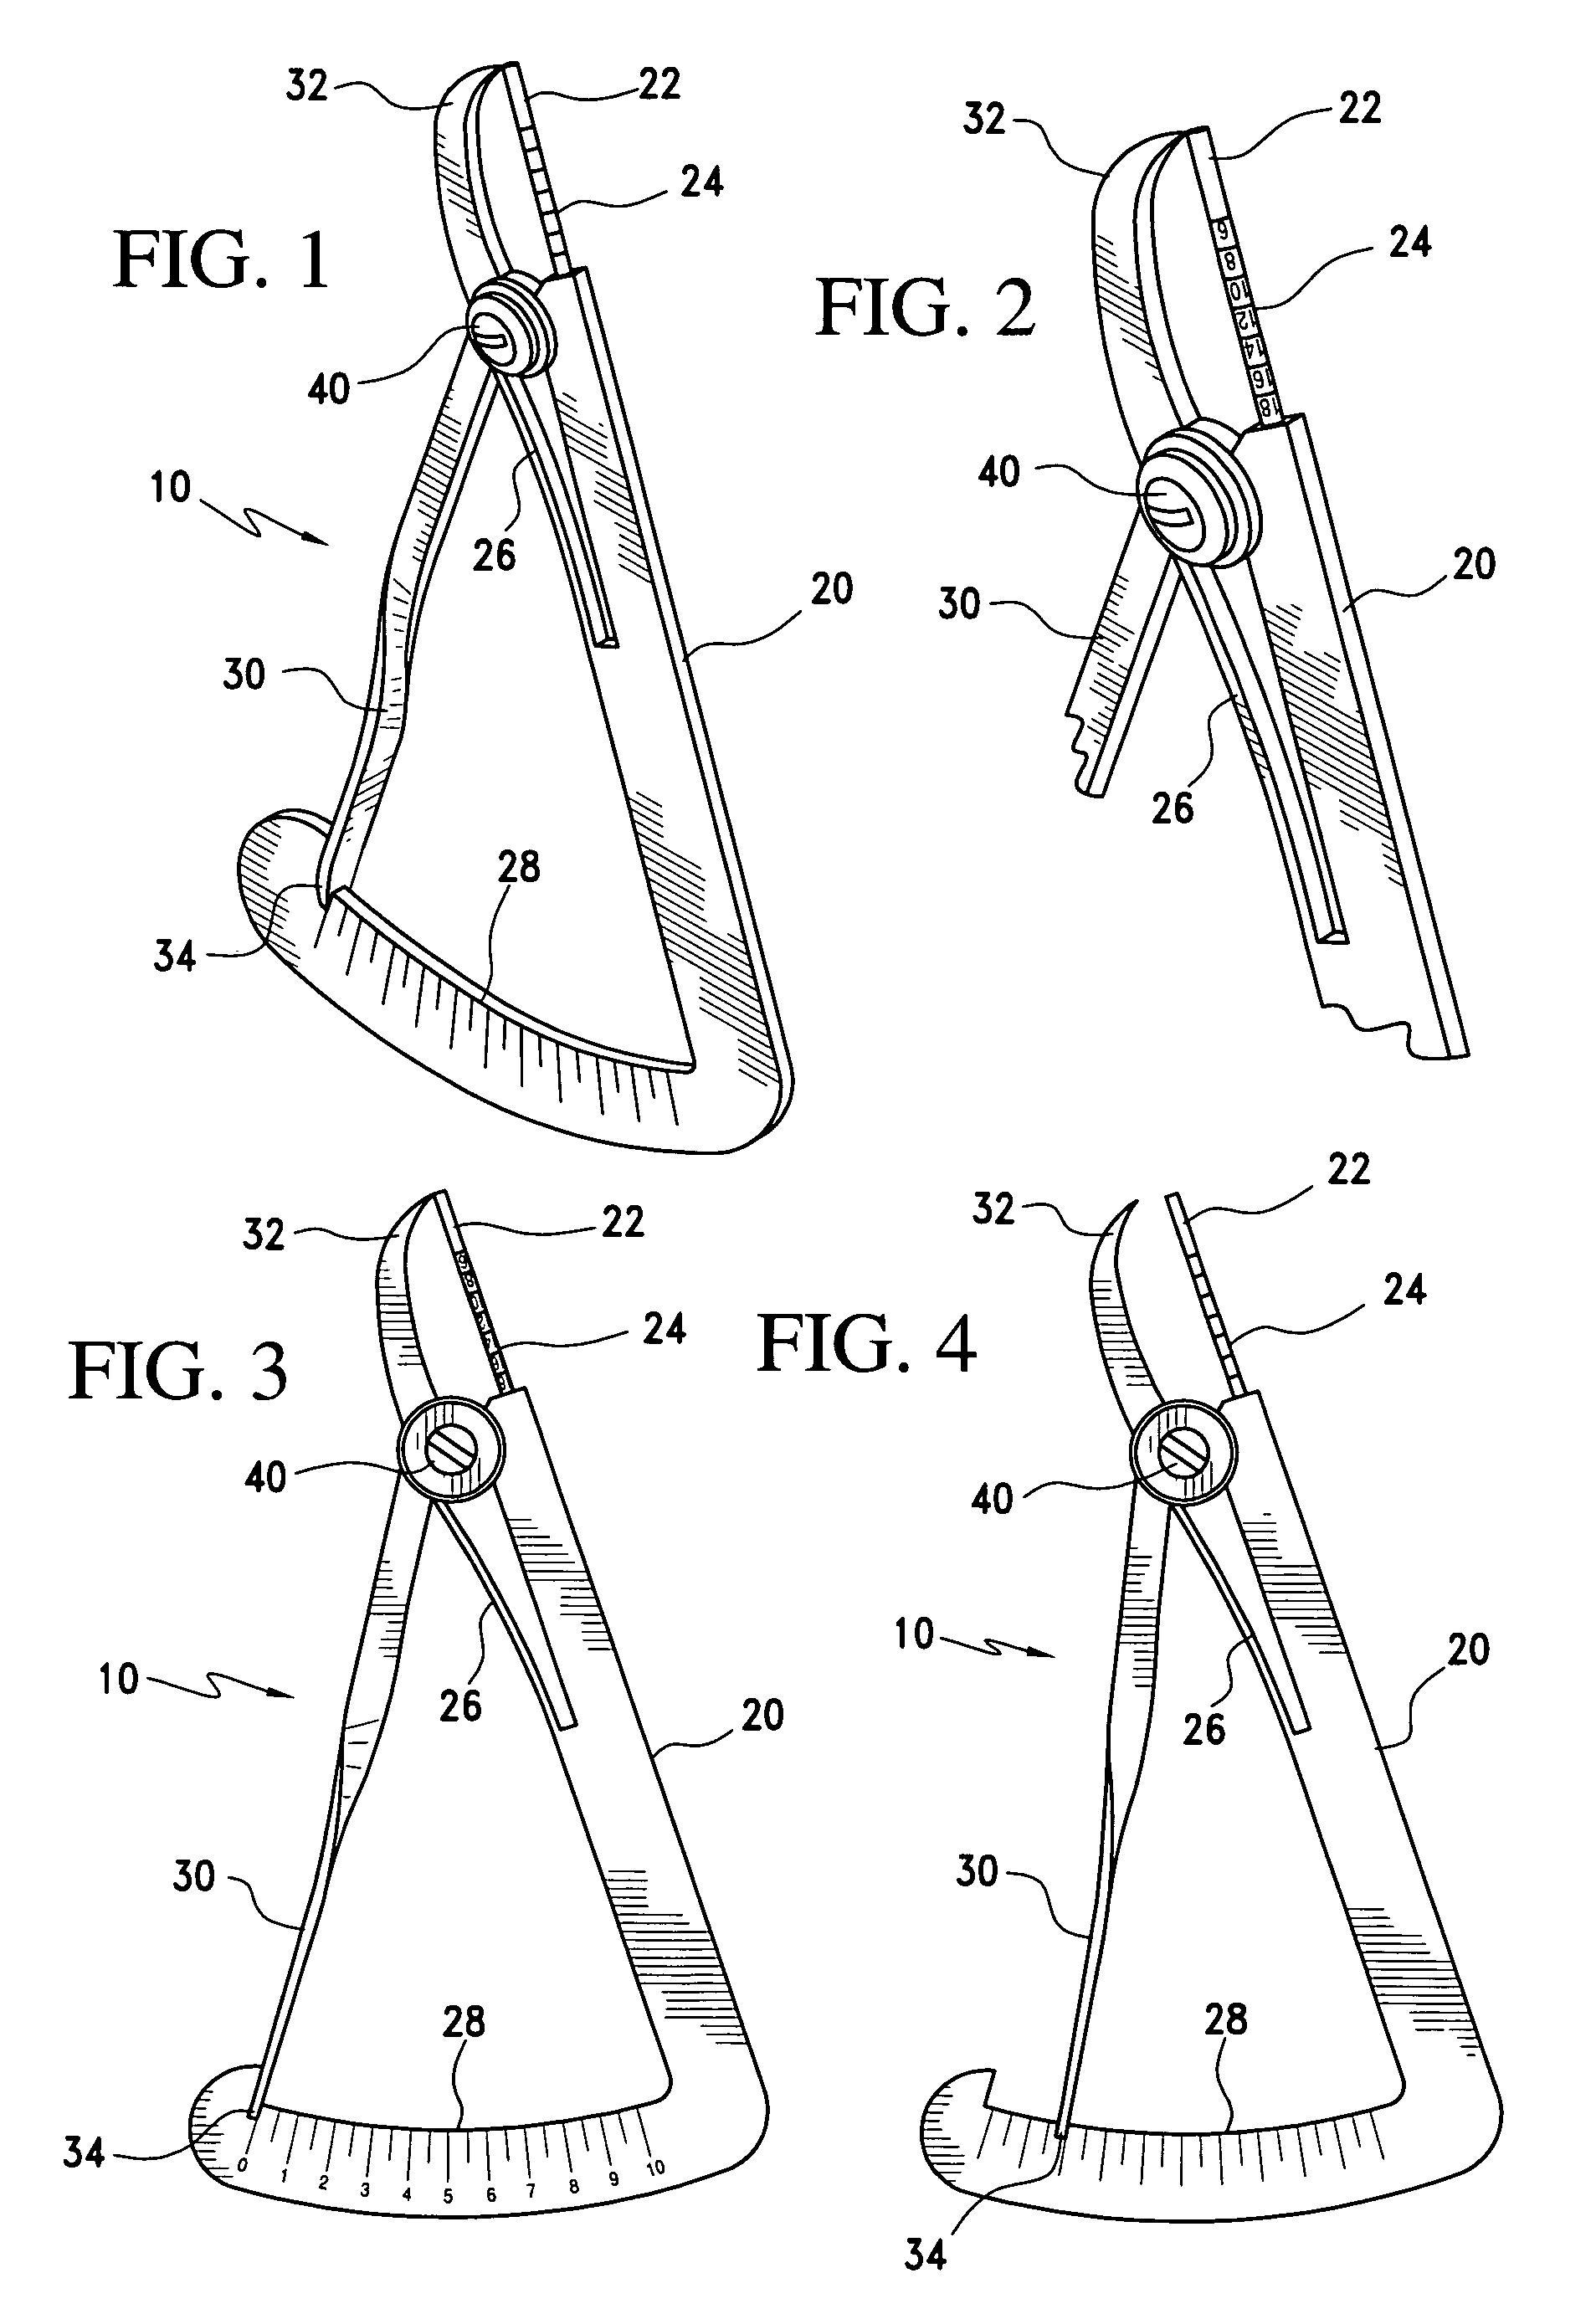 Bone measurement device for use during oral implant surgery